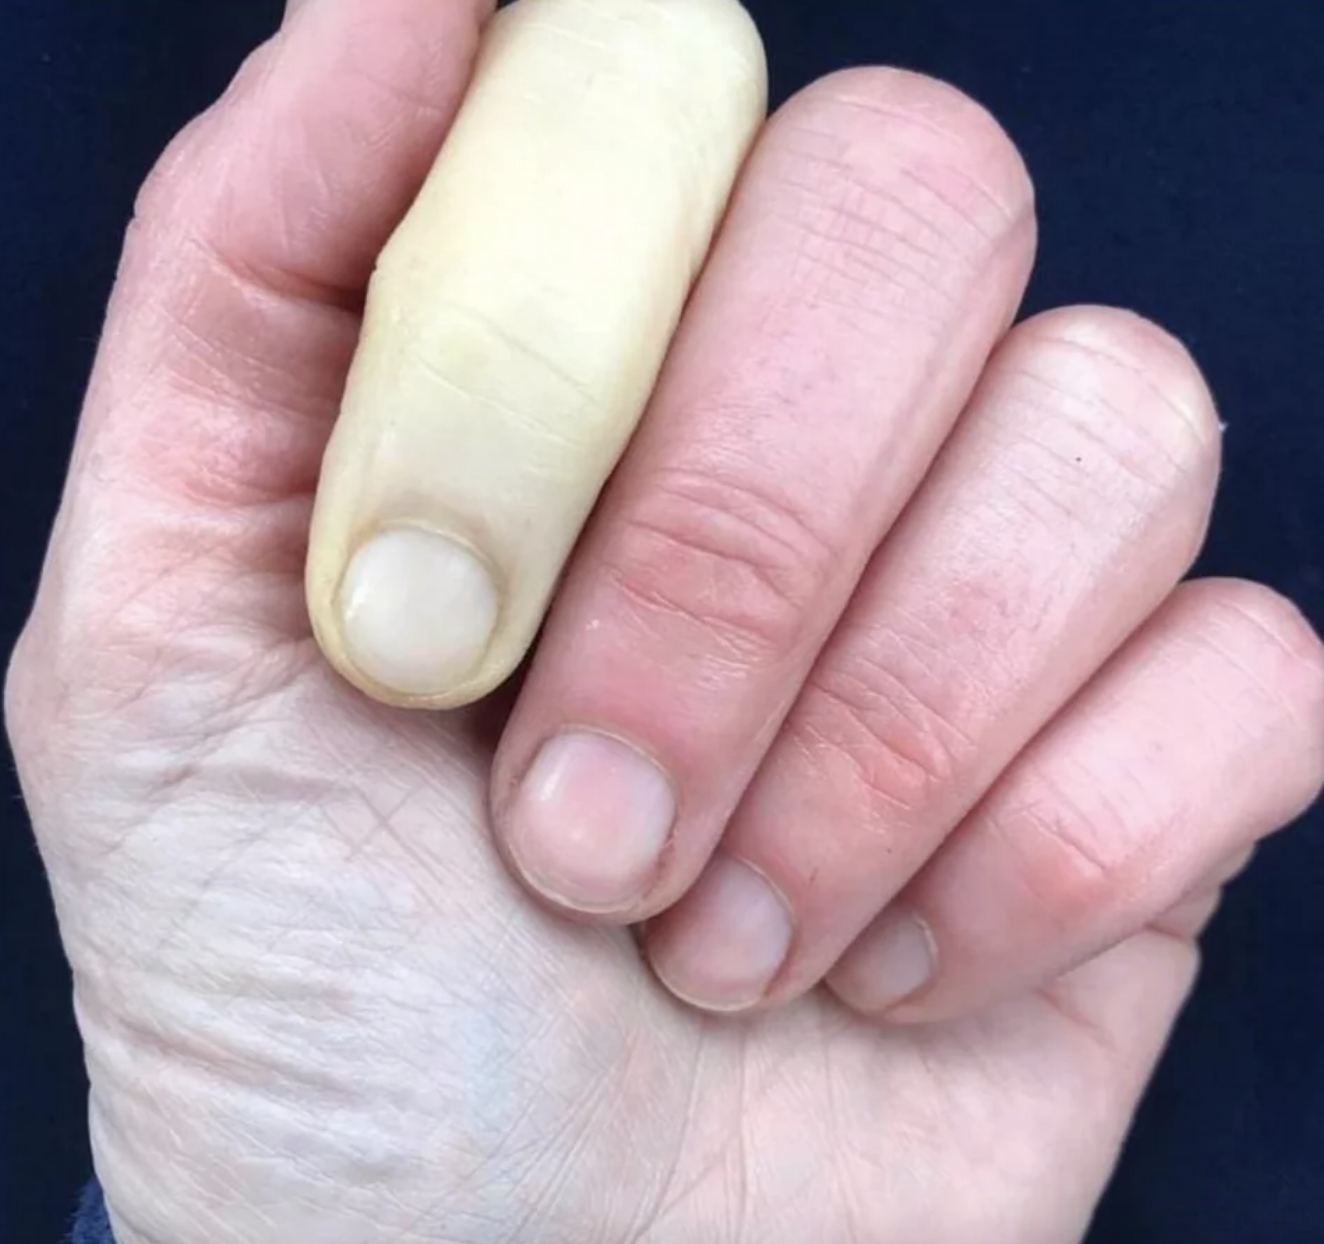 A very pale pointy finger and reddish-white other fingers on a hand